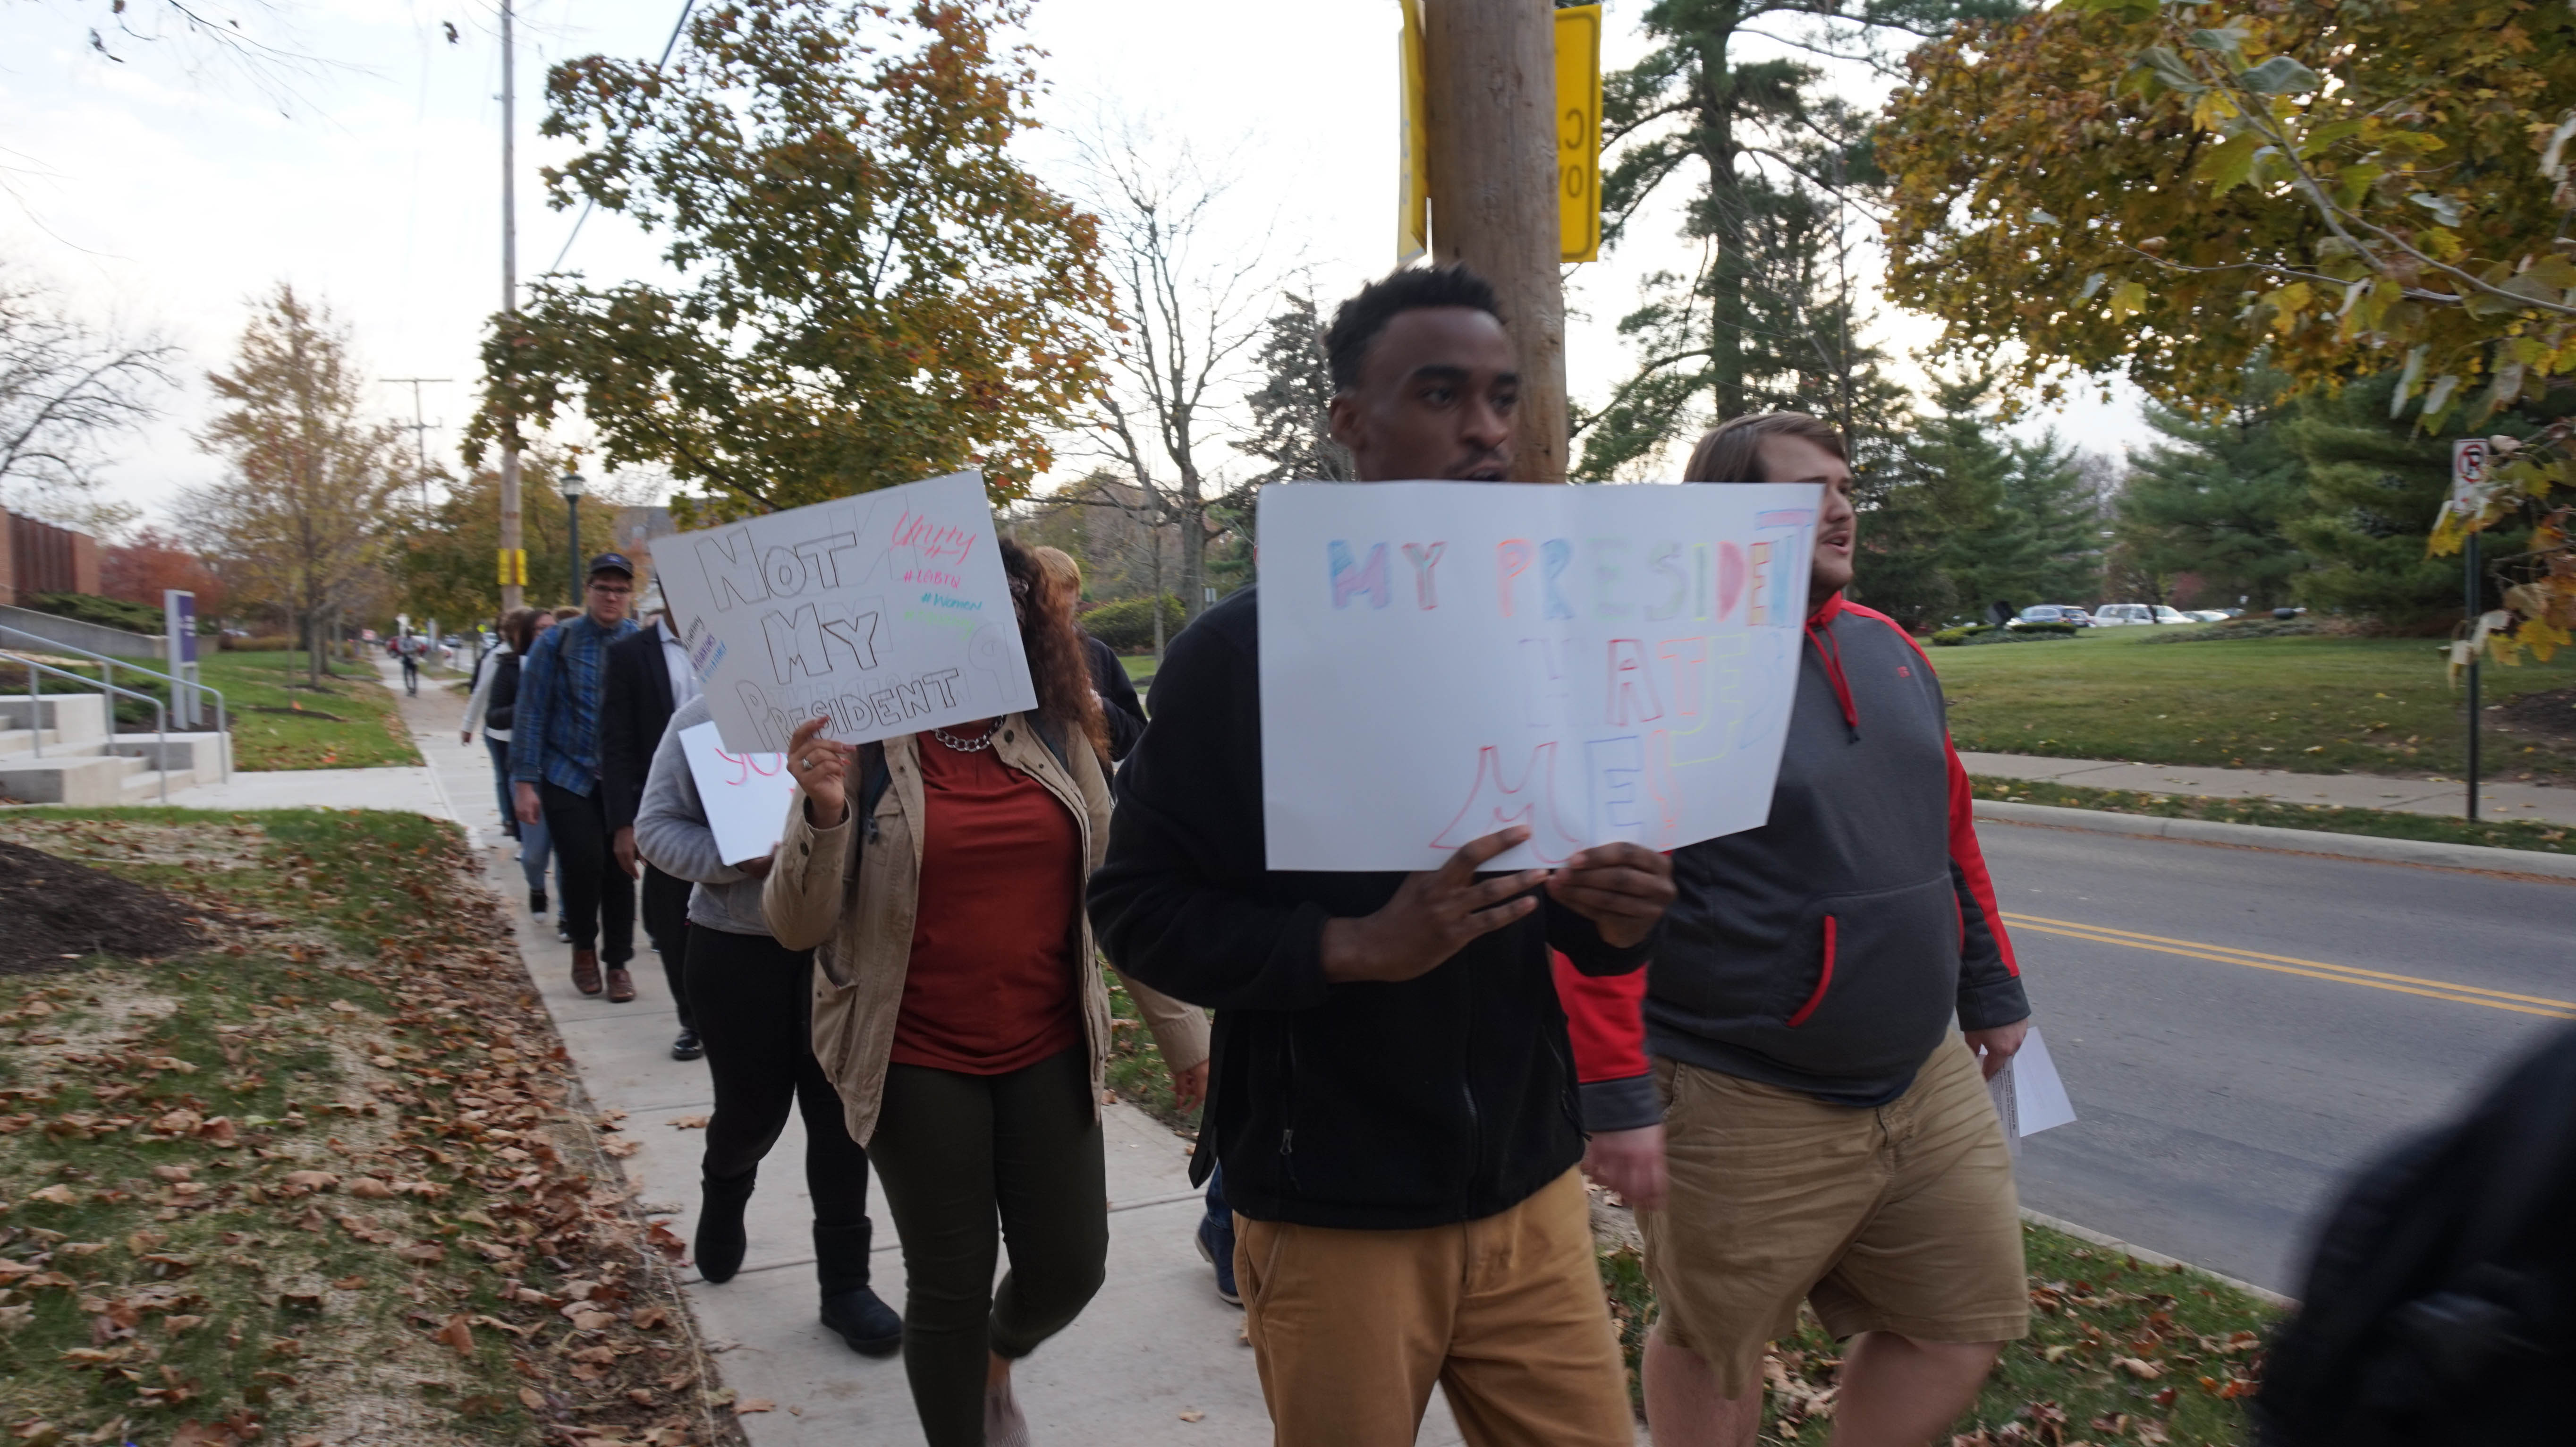 Students and faculty march in solidarity after recent escalation in acts of hate